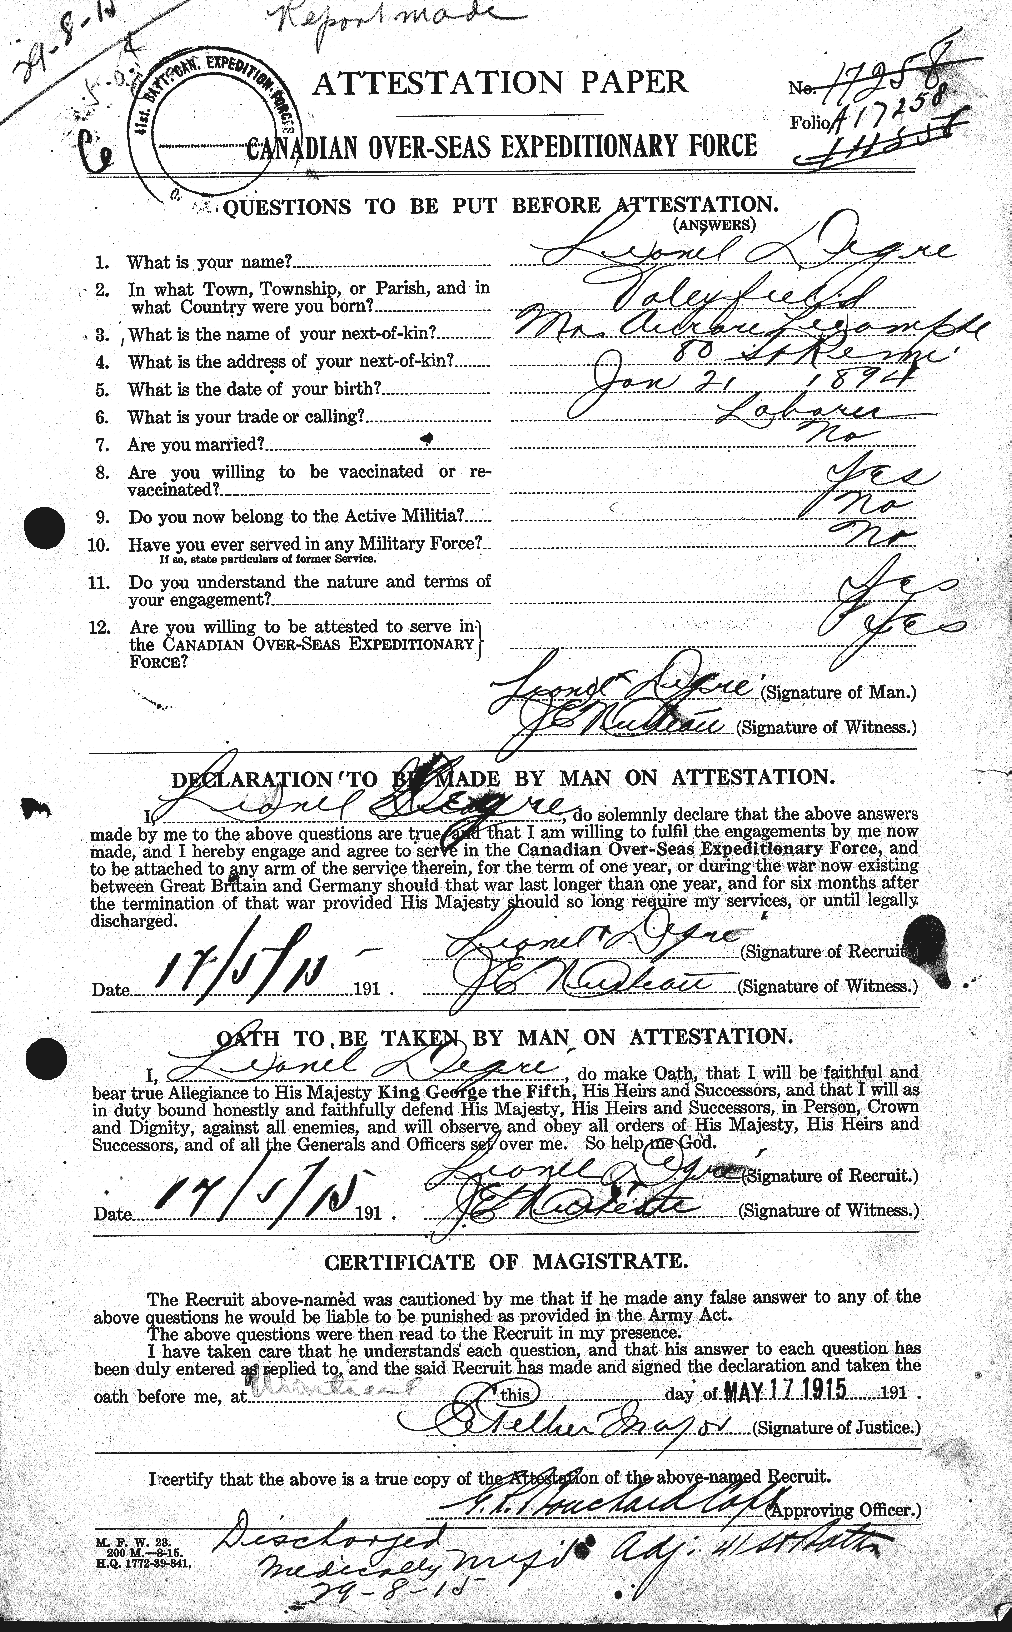 Personnel Records of the First World War - CEF 288215a